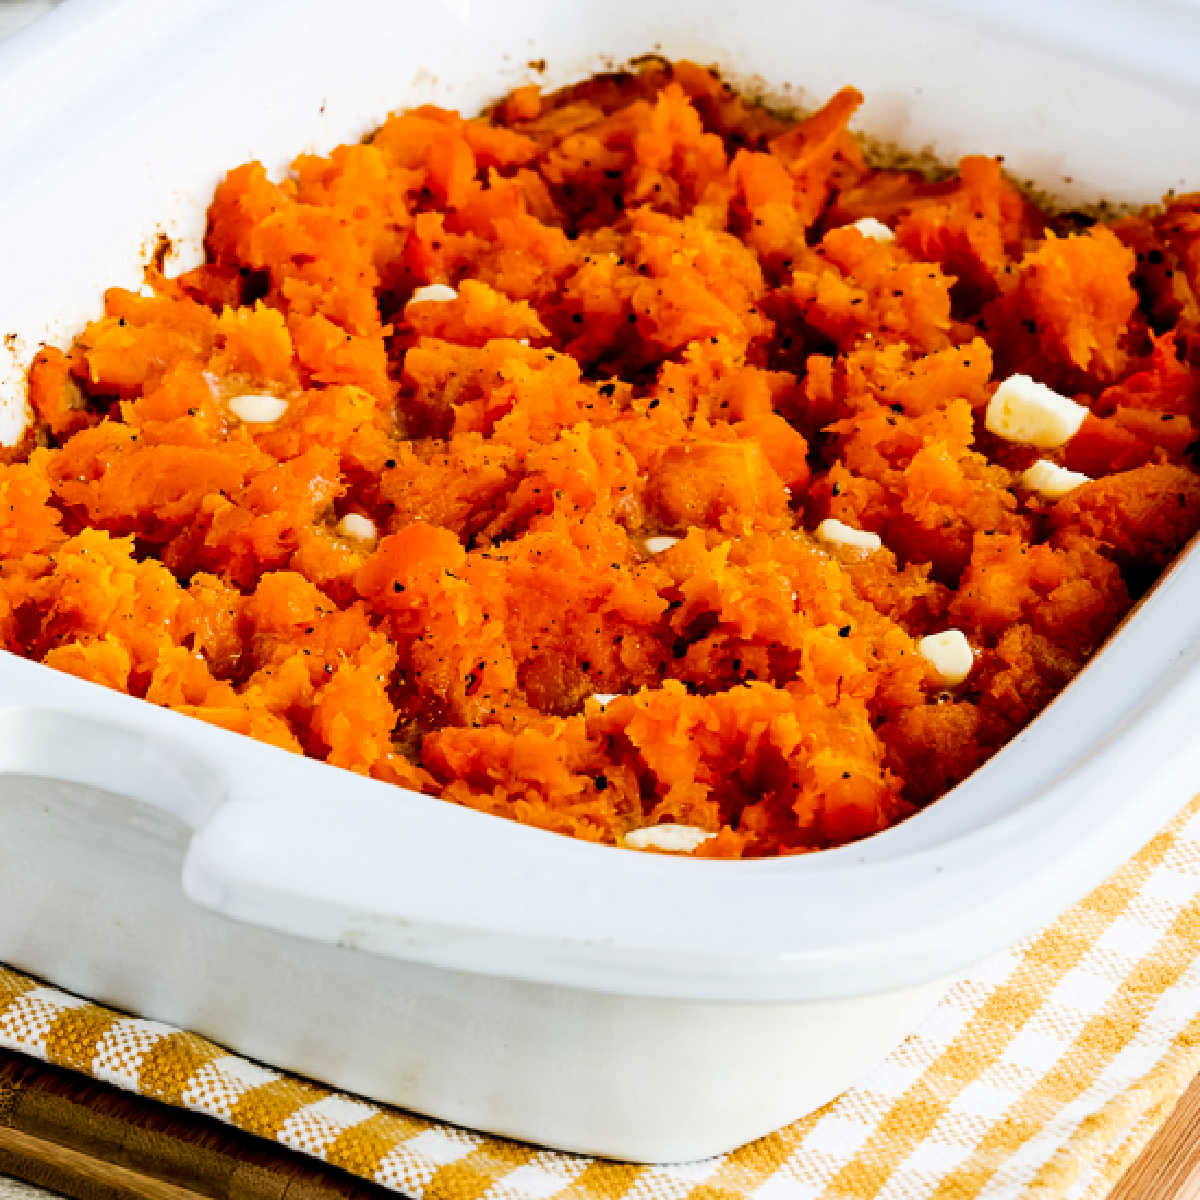 Square image for Slow Cooker Butternut Squash shown in Casserole CrockPot.